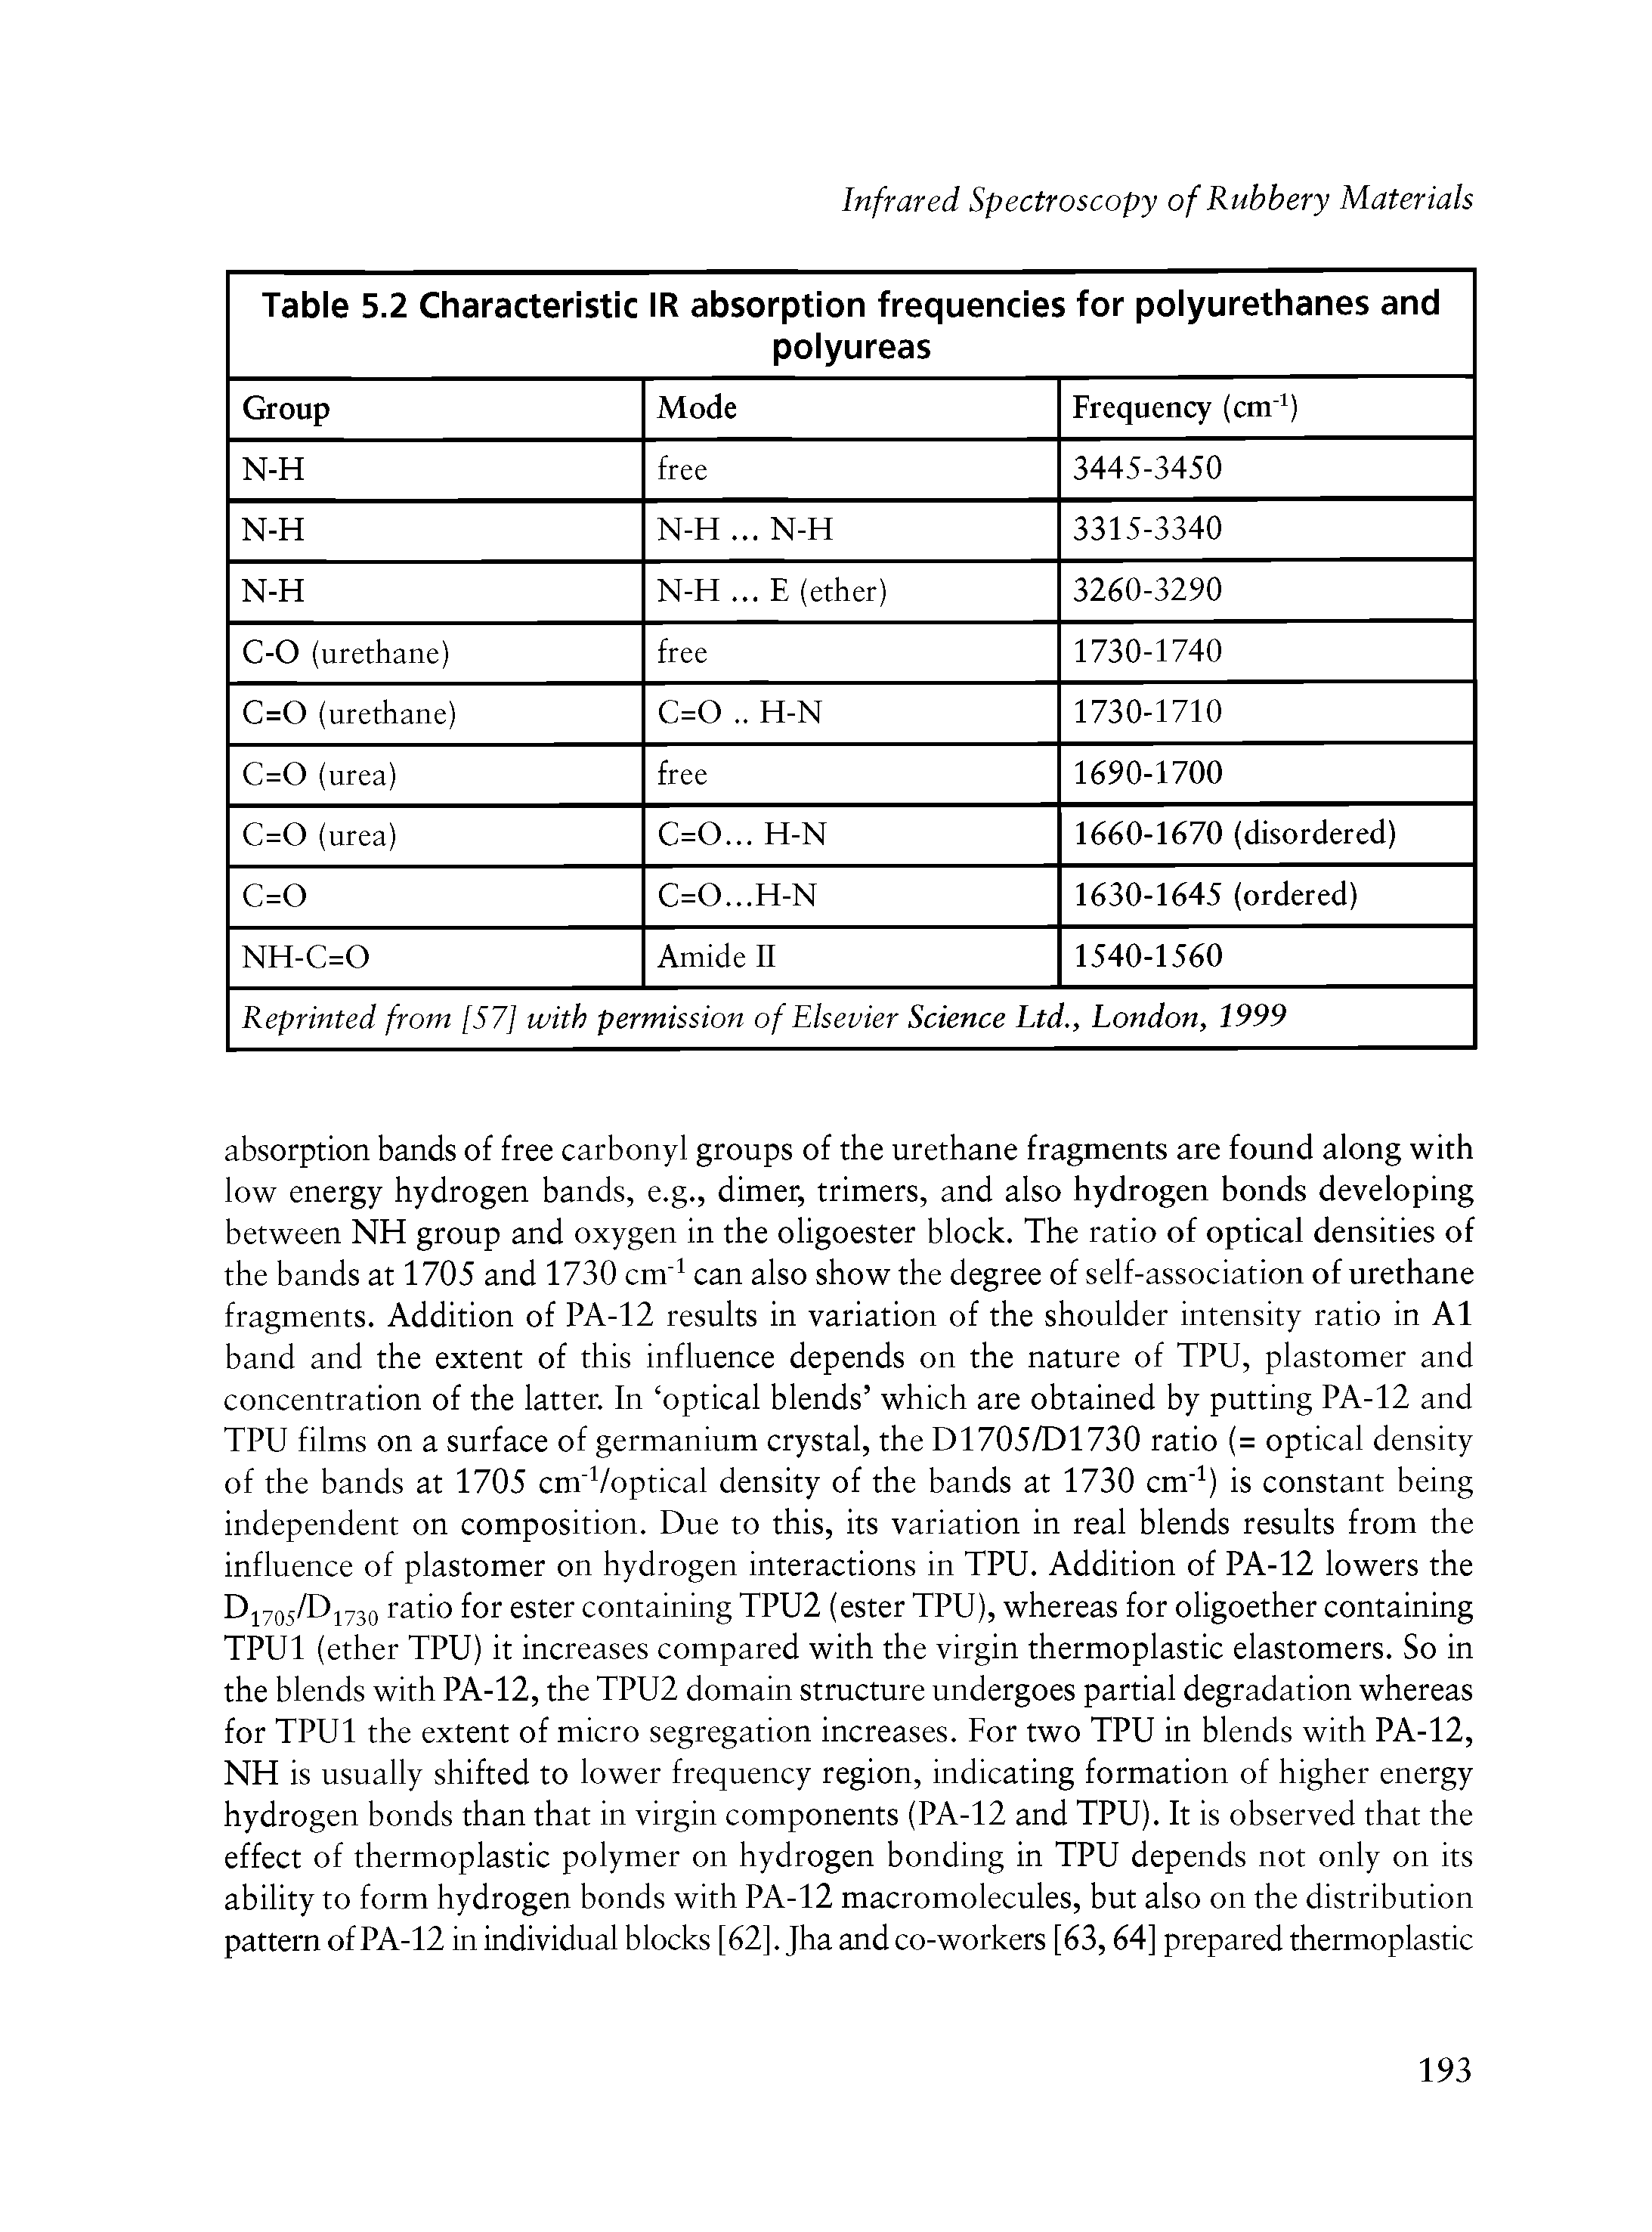 Table 5.2 Characteristic IR absorption frequencies for polyurethanes and polyureas ...